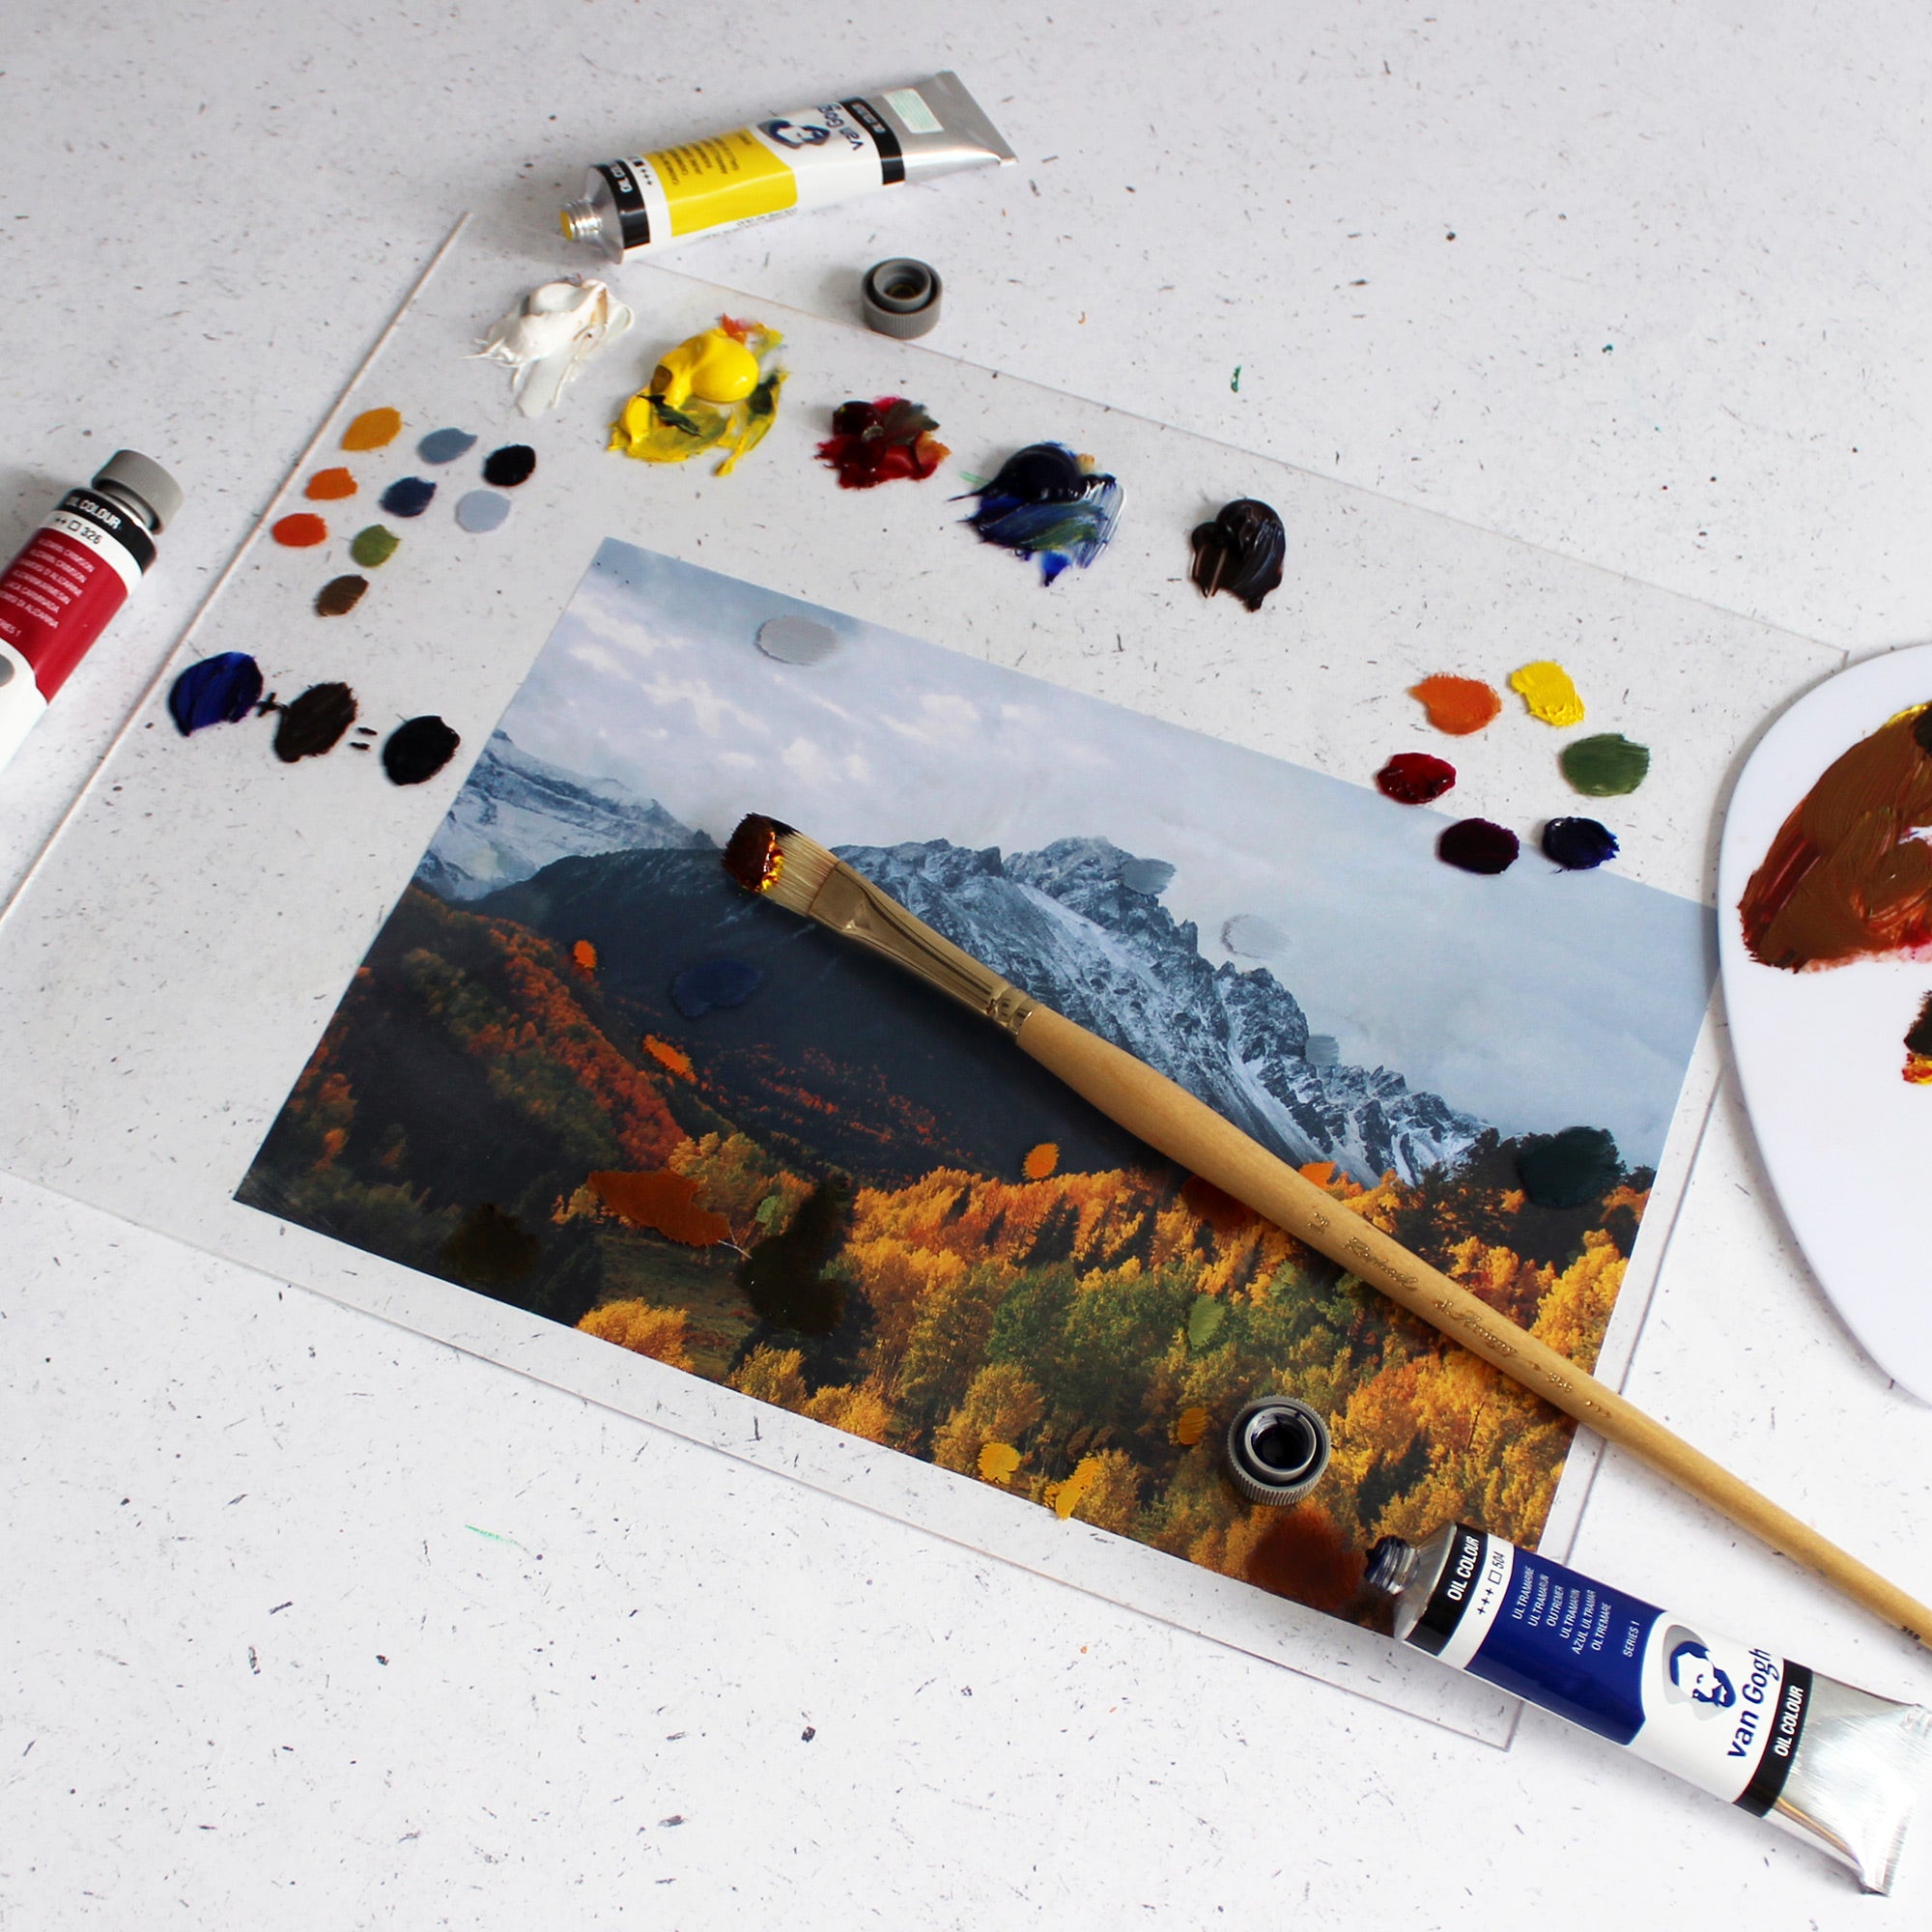 Know-how: Colour Mixing for Oils